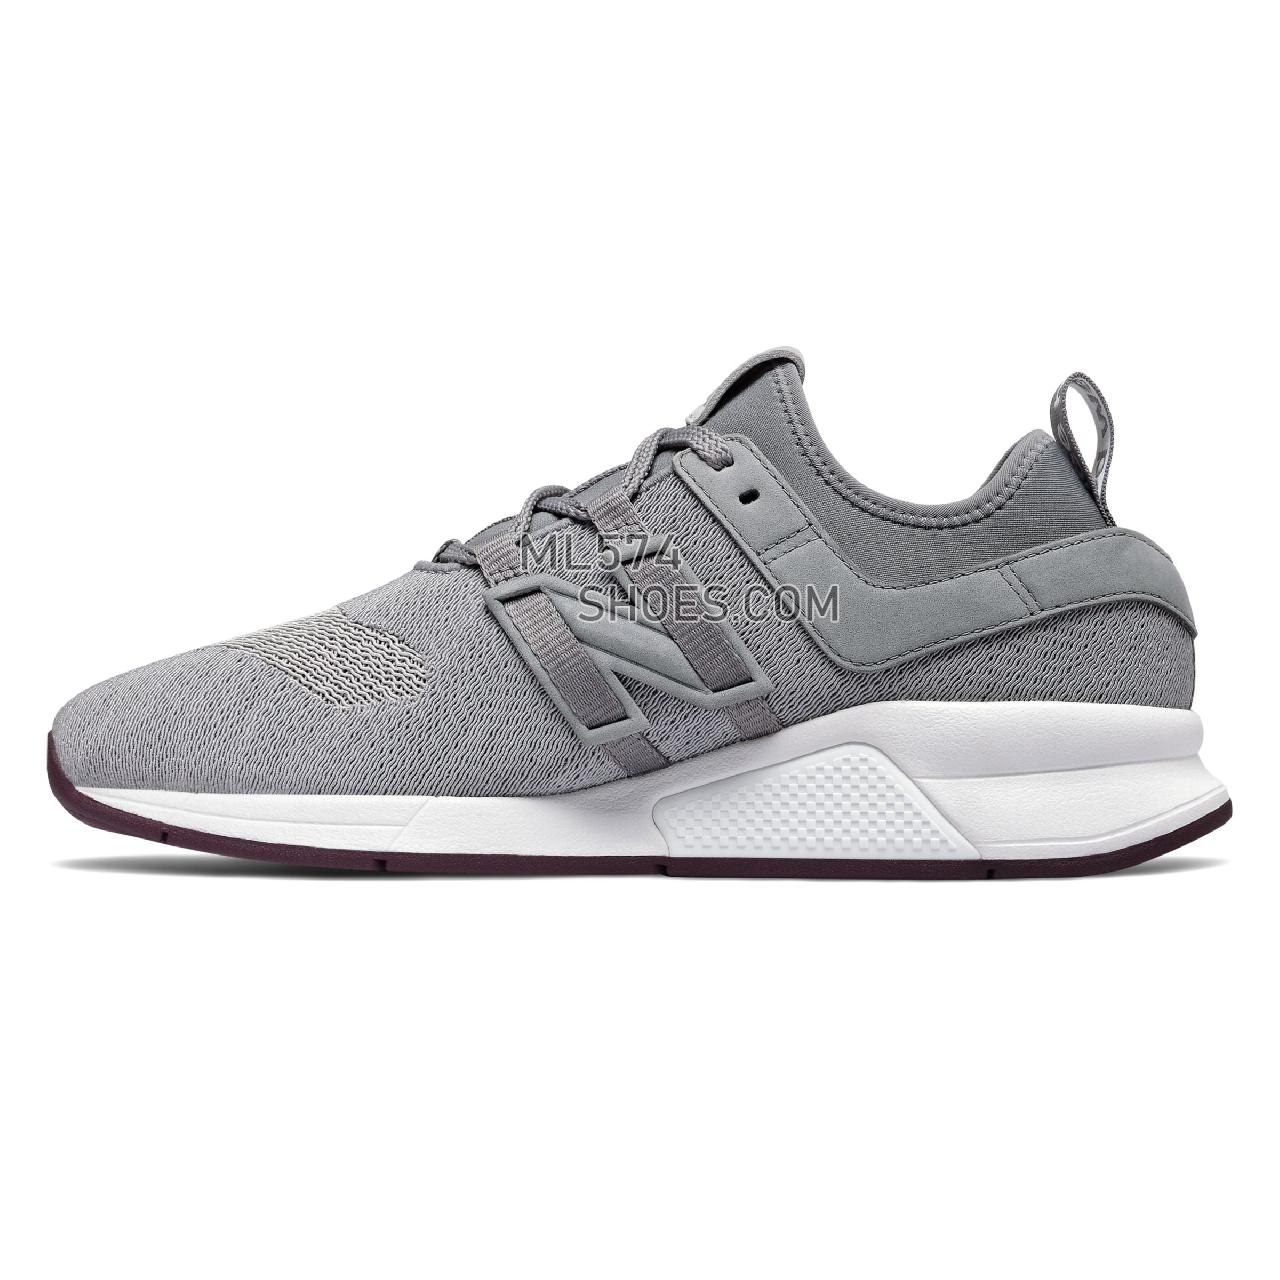 New Balance 247 Trace Fiber - Men's Sport Style Sneakers - Gunmetal with Dark Currant - MS247TGS